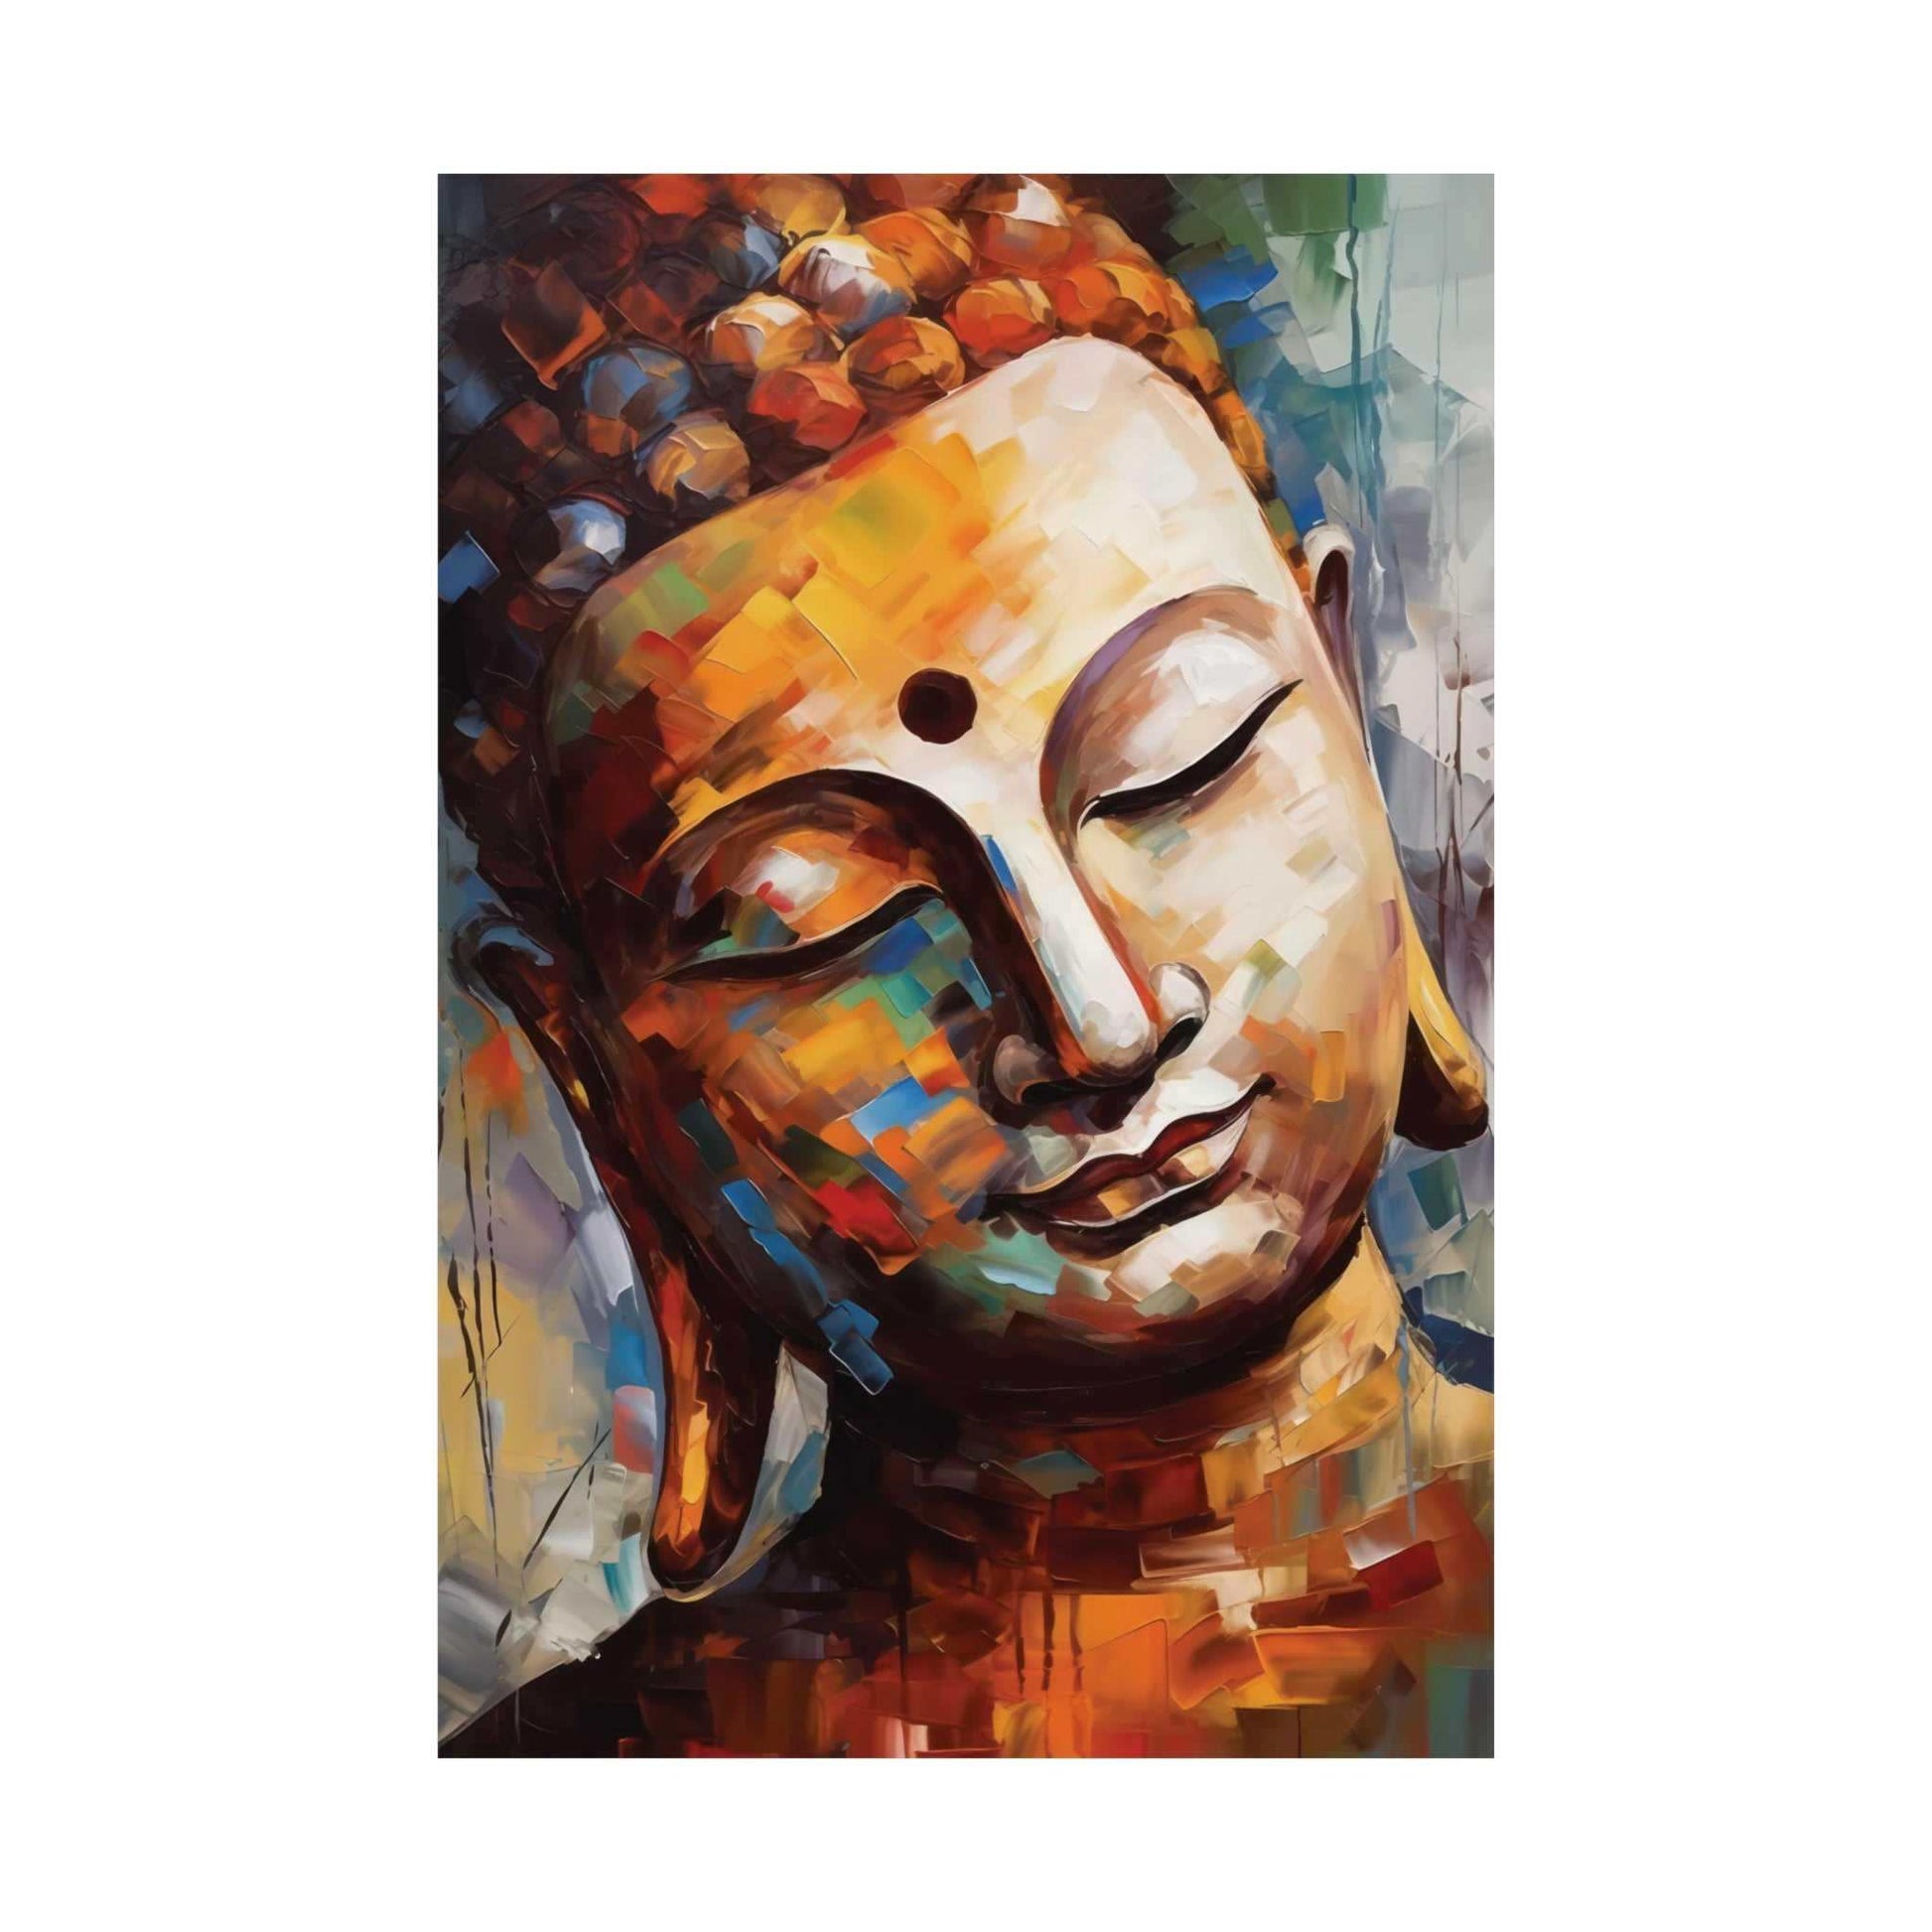 ZenArtBliss.com's Abstract Meditation Poster, a modern Buddha depicted in a kaleidoscope of abstract colors on a 24x36 matte canvas.